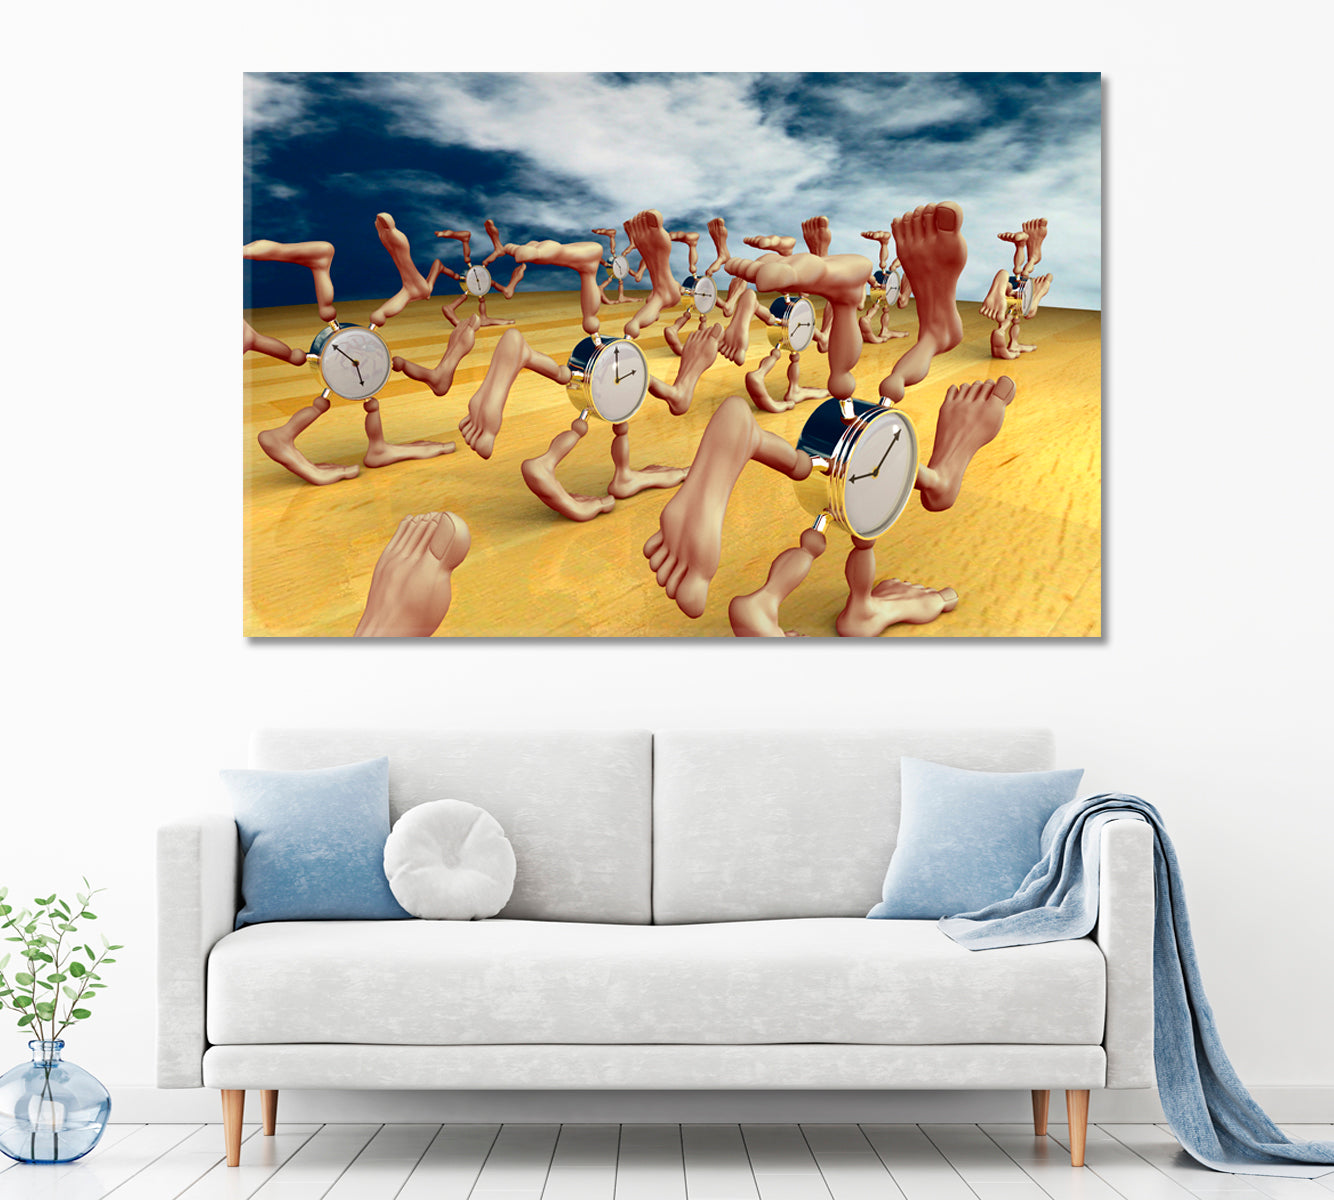 THE TIME HAS COME Inspirid by Dali Running Сlocks with Lots of Legs Surreal Fantasy Large Art Print Décor Artesty 1 panel 24" x 16" 